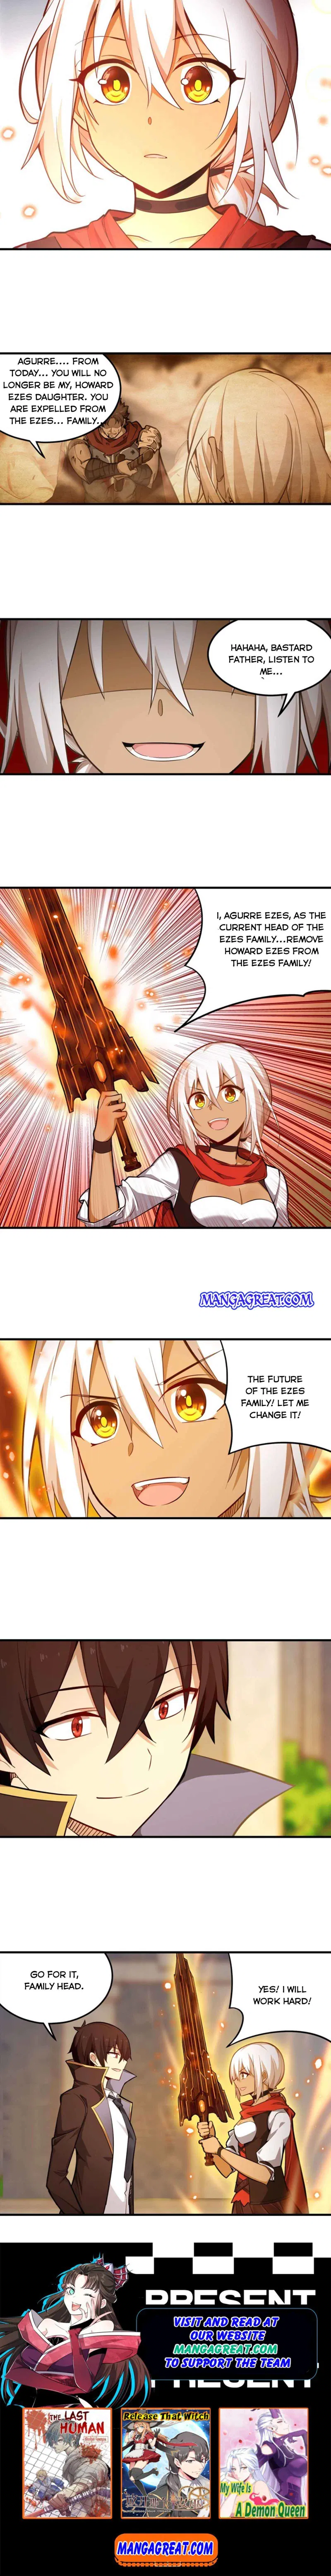 Infinite Apostles and Twelve War Girls Chapter 143 page 6